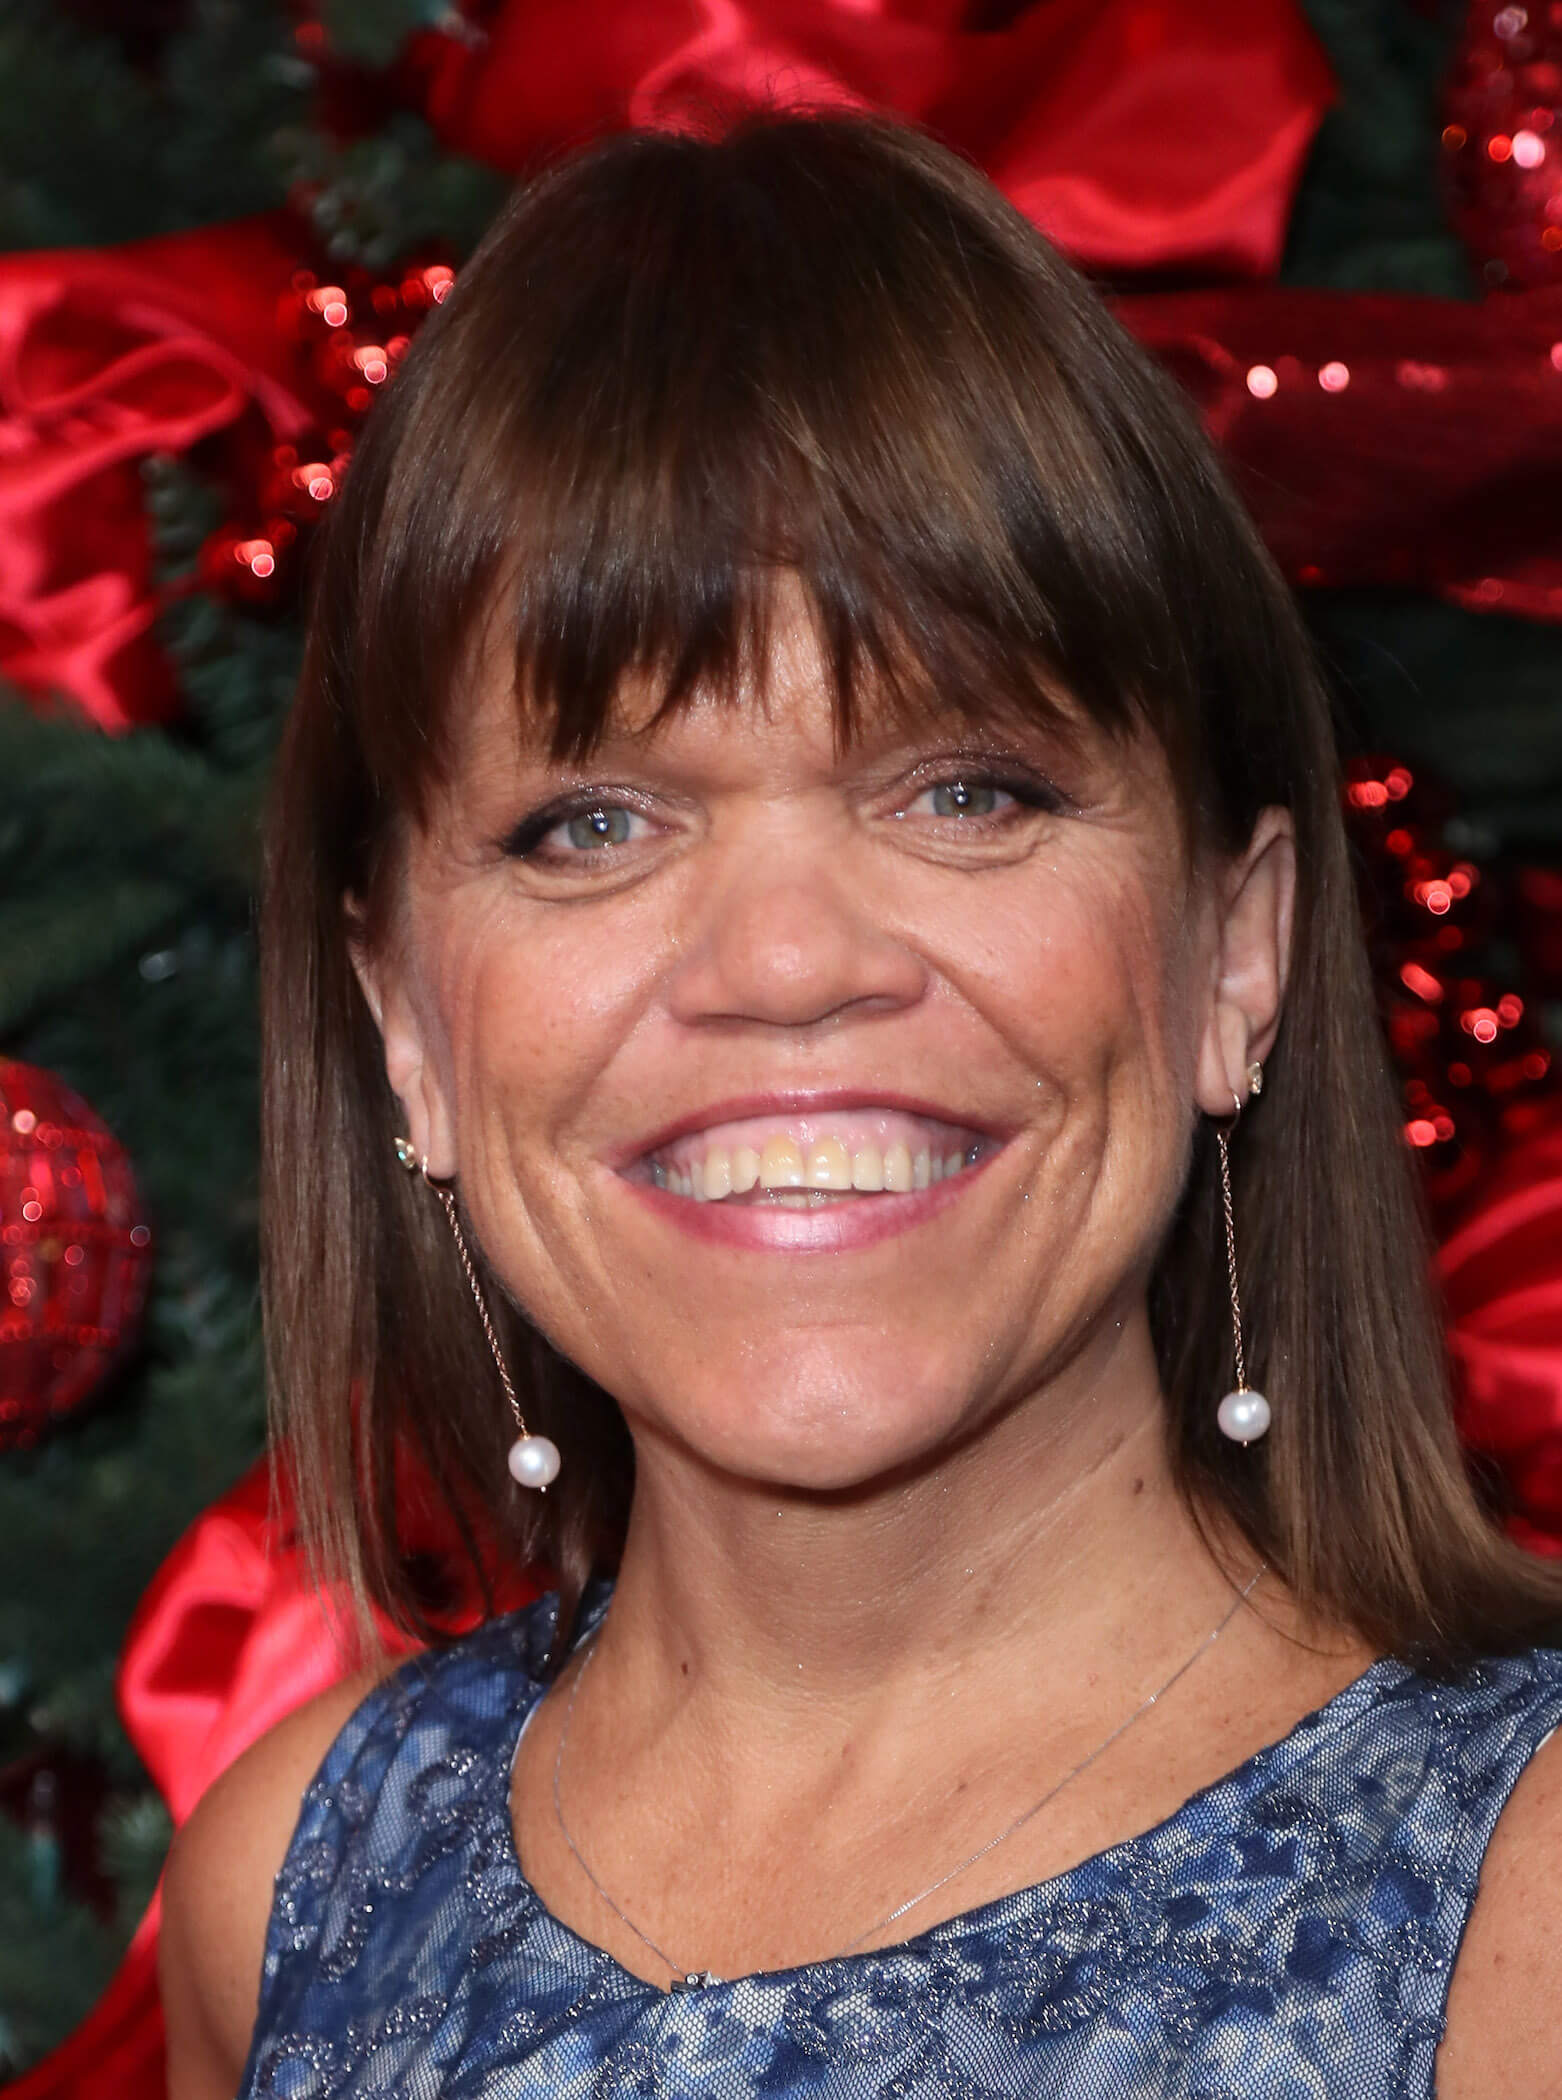 A close-up of Amy Roloff smiling from 'Little People, Big World'